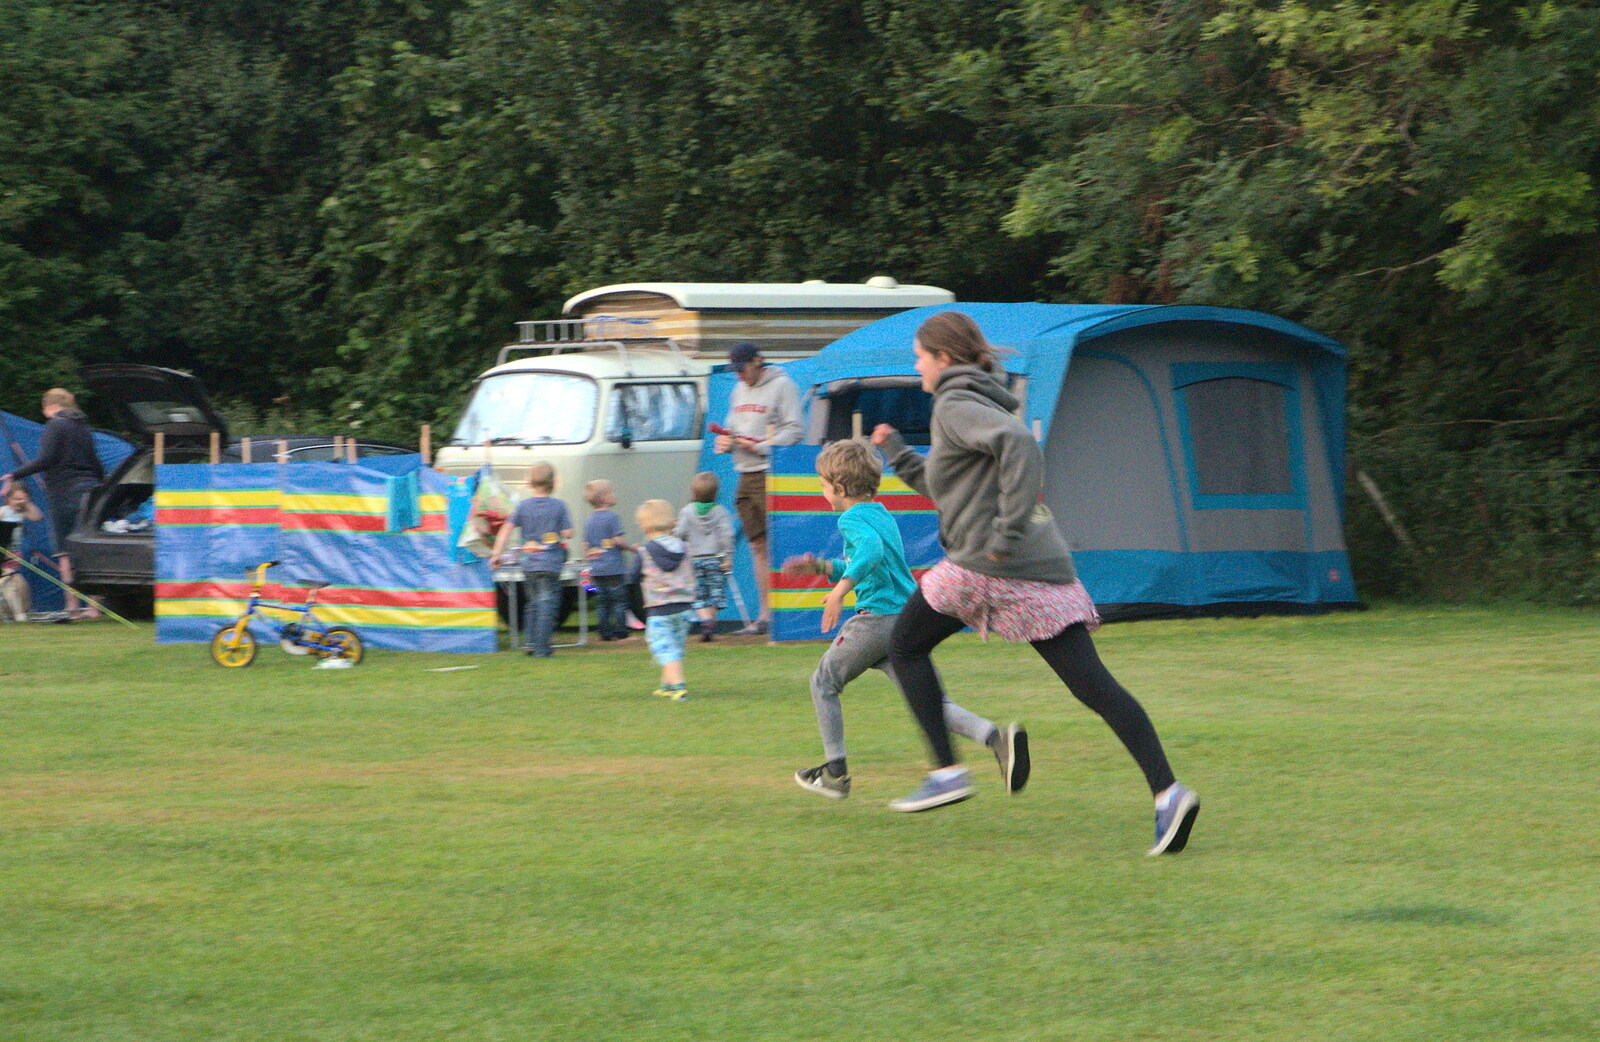 Time for a quick race around the field from Camping in West Runton, North Norfolk - 30th July 2016